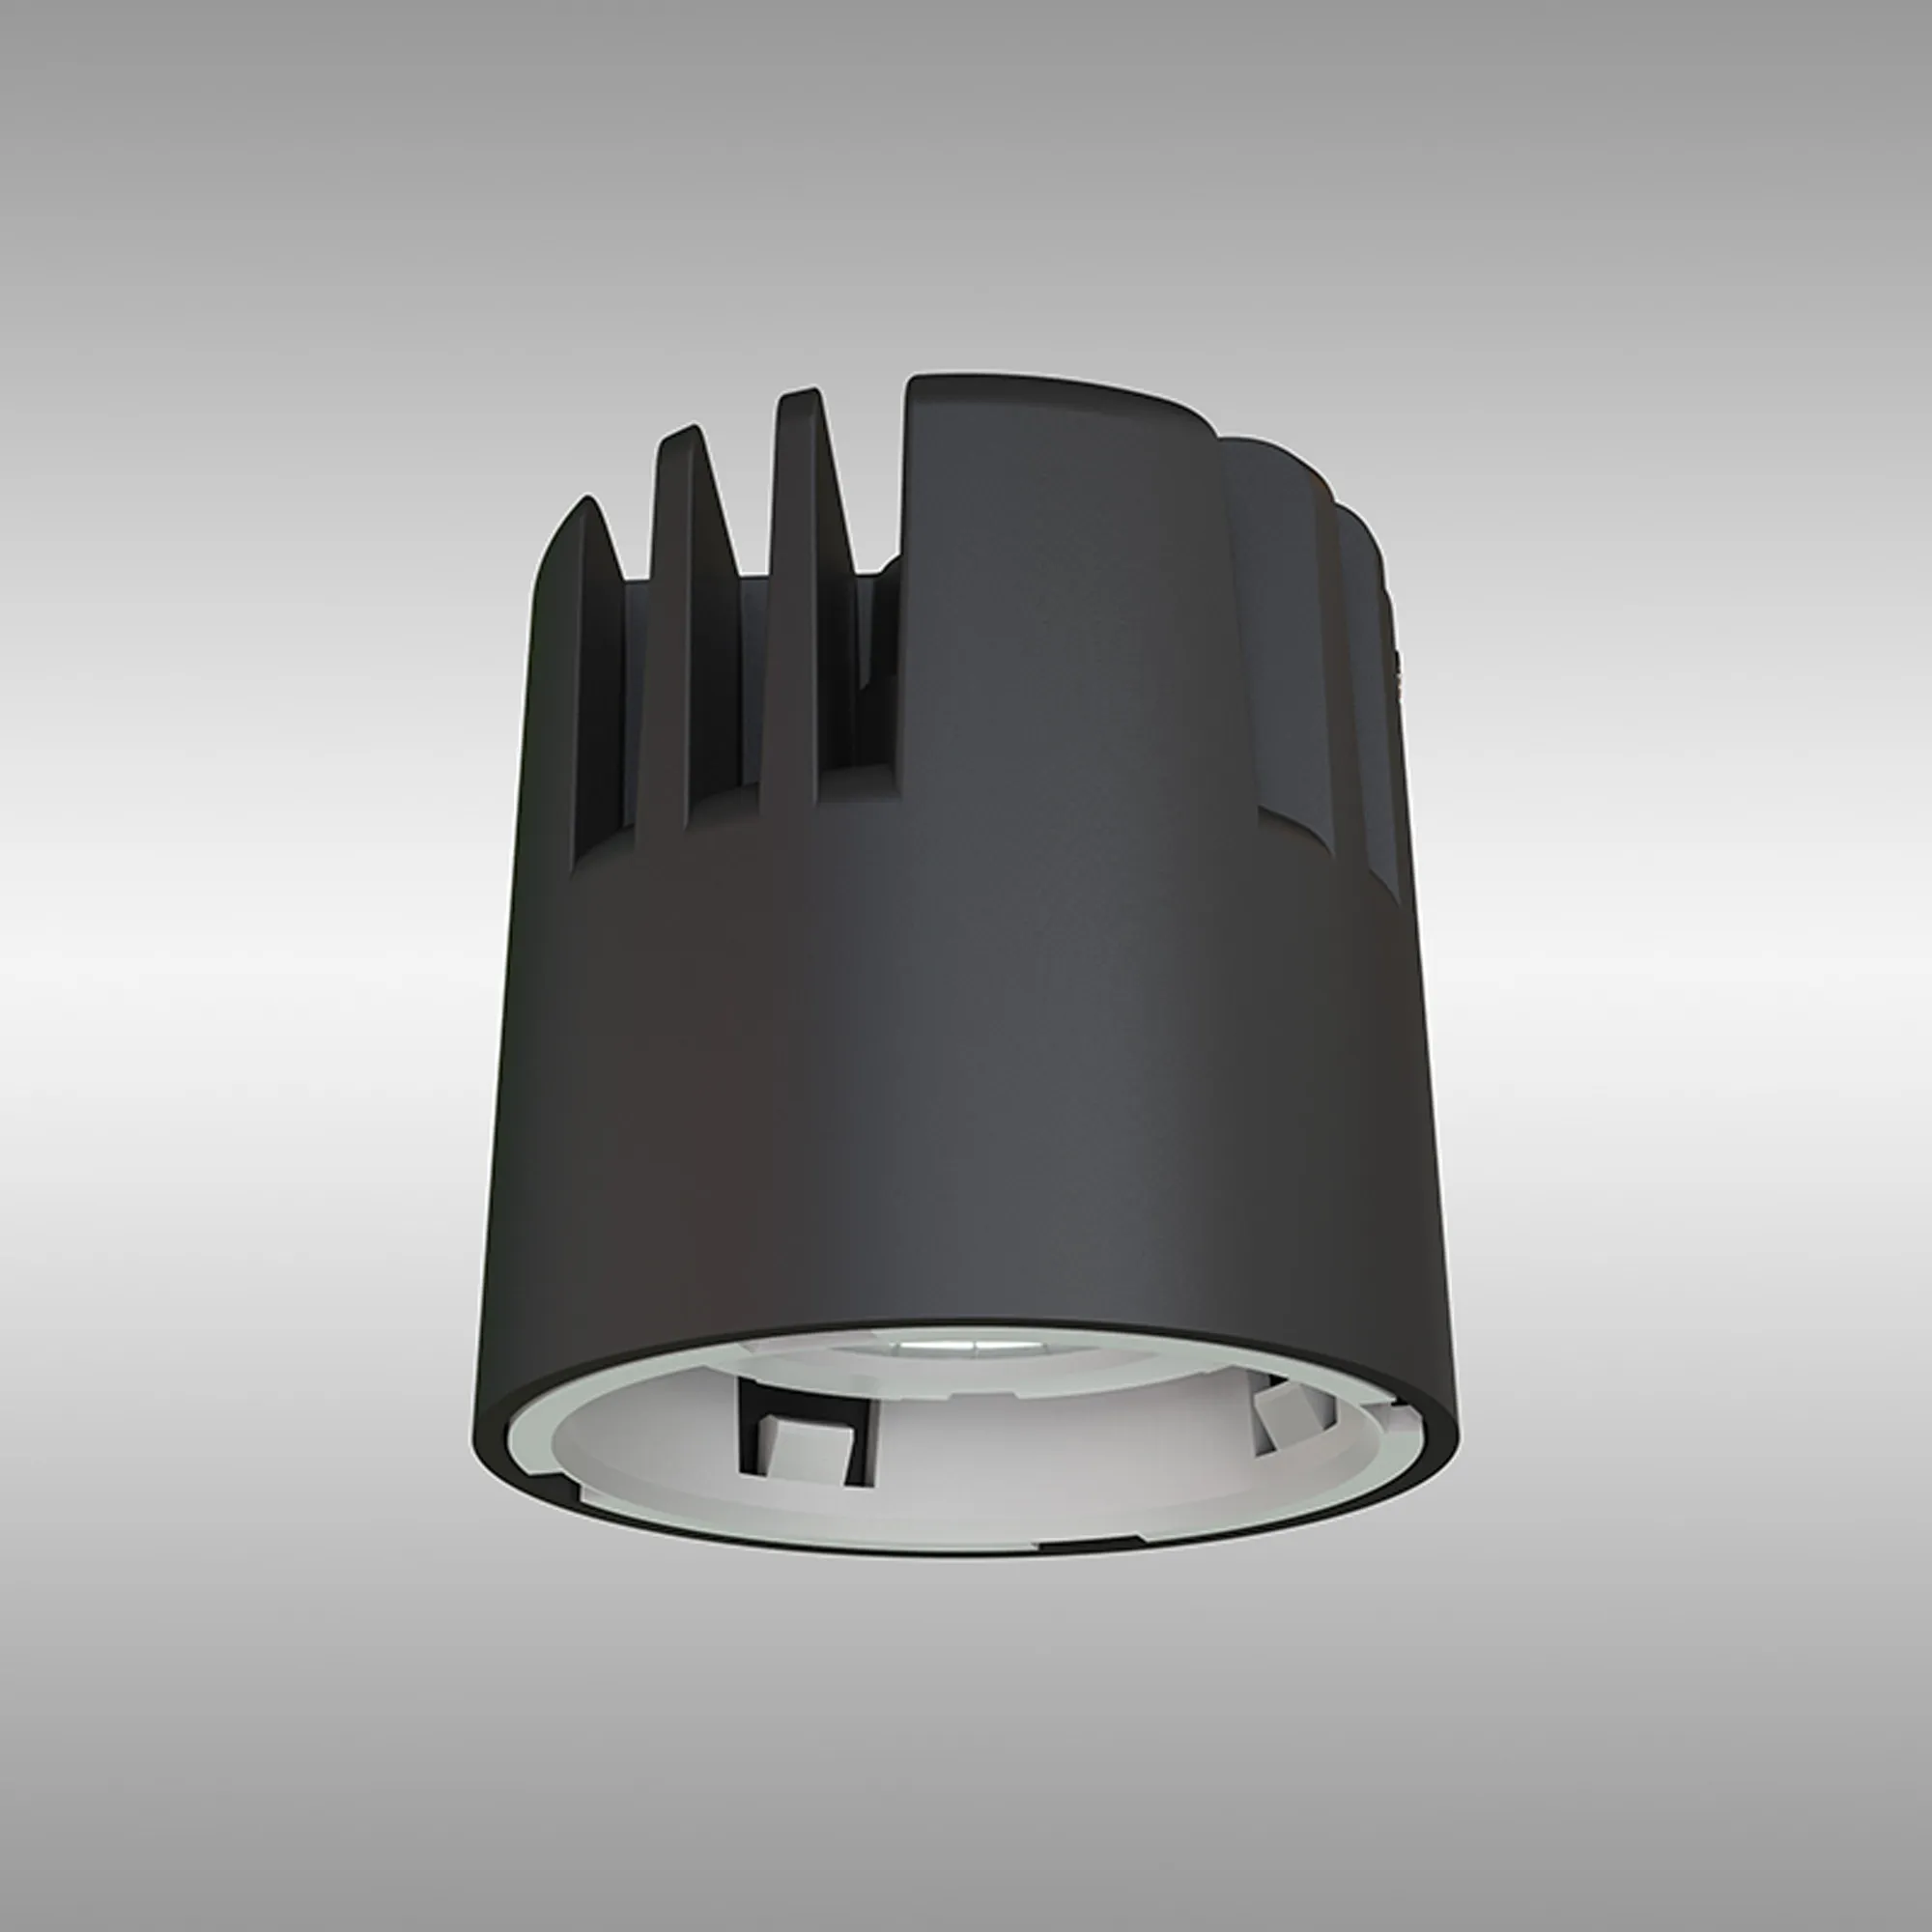 M8771  Sunset; 6W; 150mA; Black LED Engine; 2700K; 510lm; 50° Deg; IP20; DRIVER NOT INC.; Recessed Base Required; 5yrs Warranty